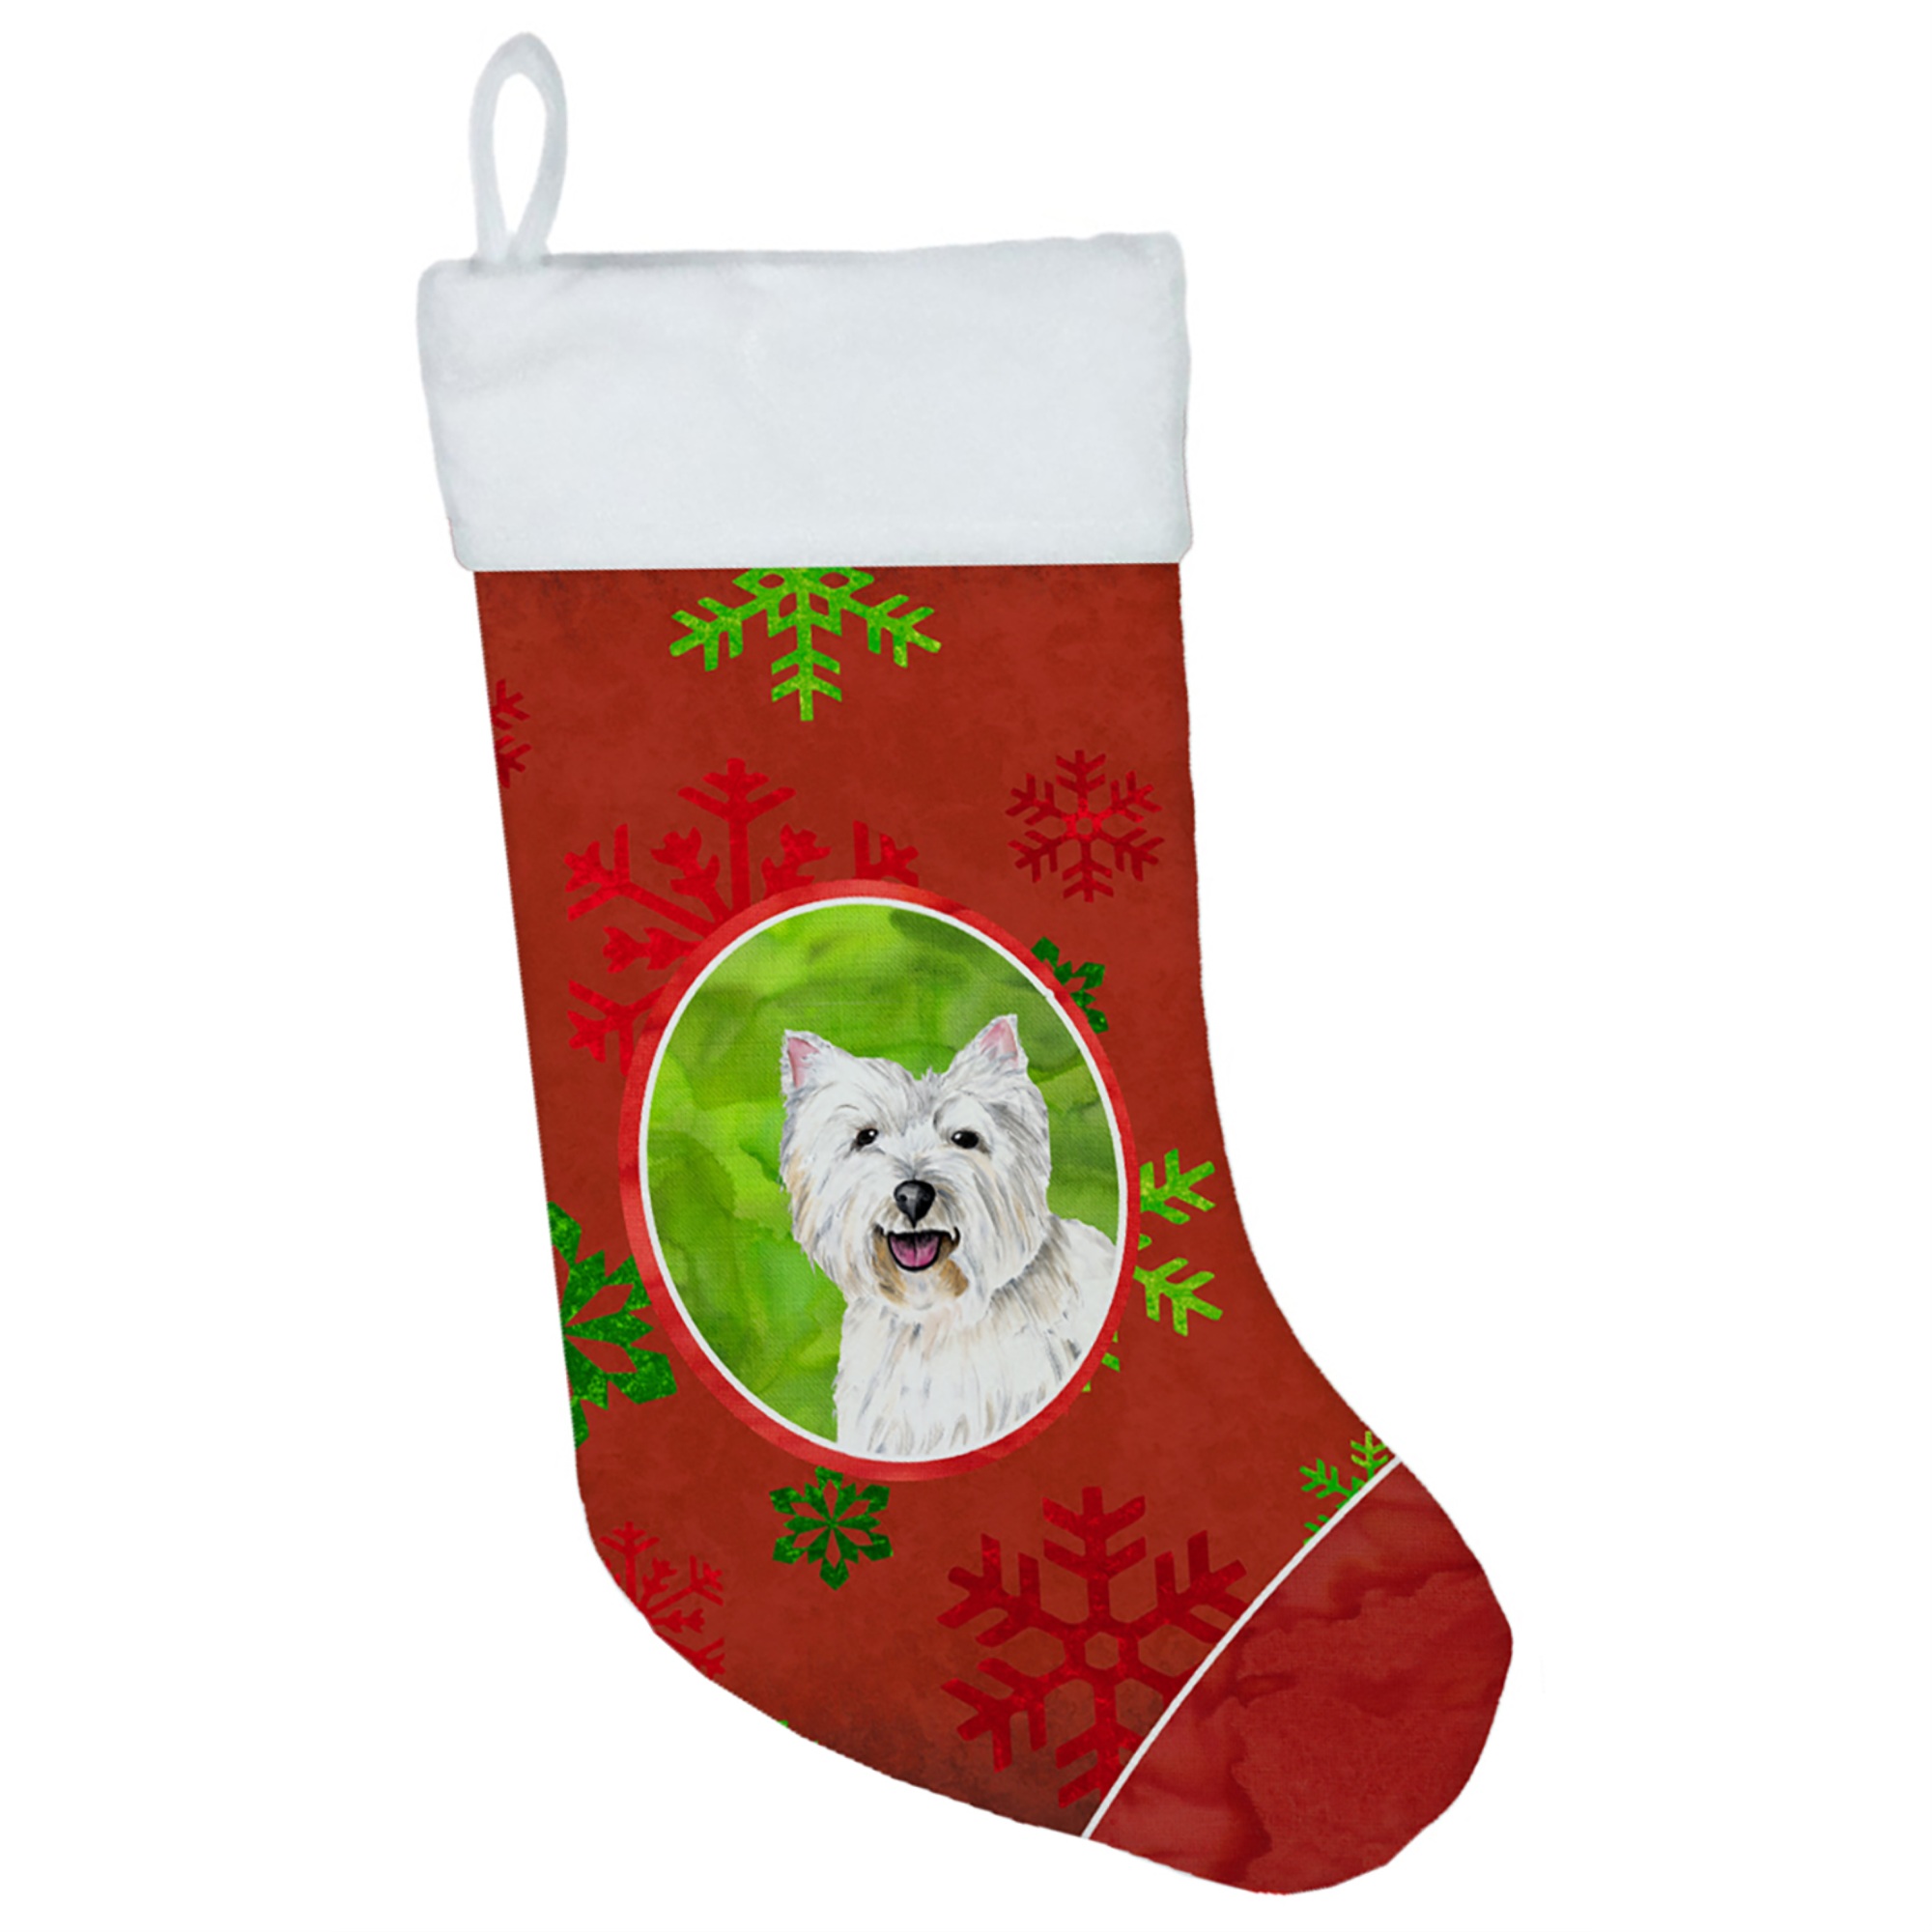 Caroline's Treasures "Caroline's Treasures SC9410-CS Westie Red and Green Snowflakes Holiday Christmas Stocking, 11 x 18"", Multicolor"